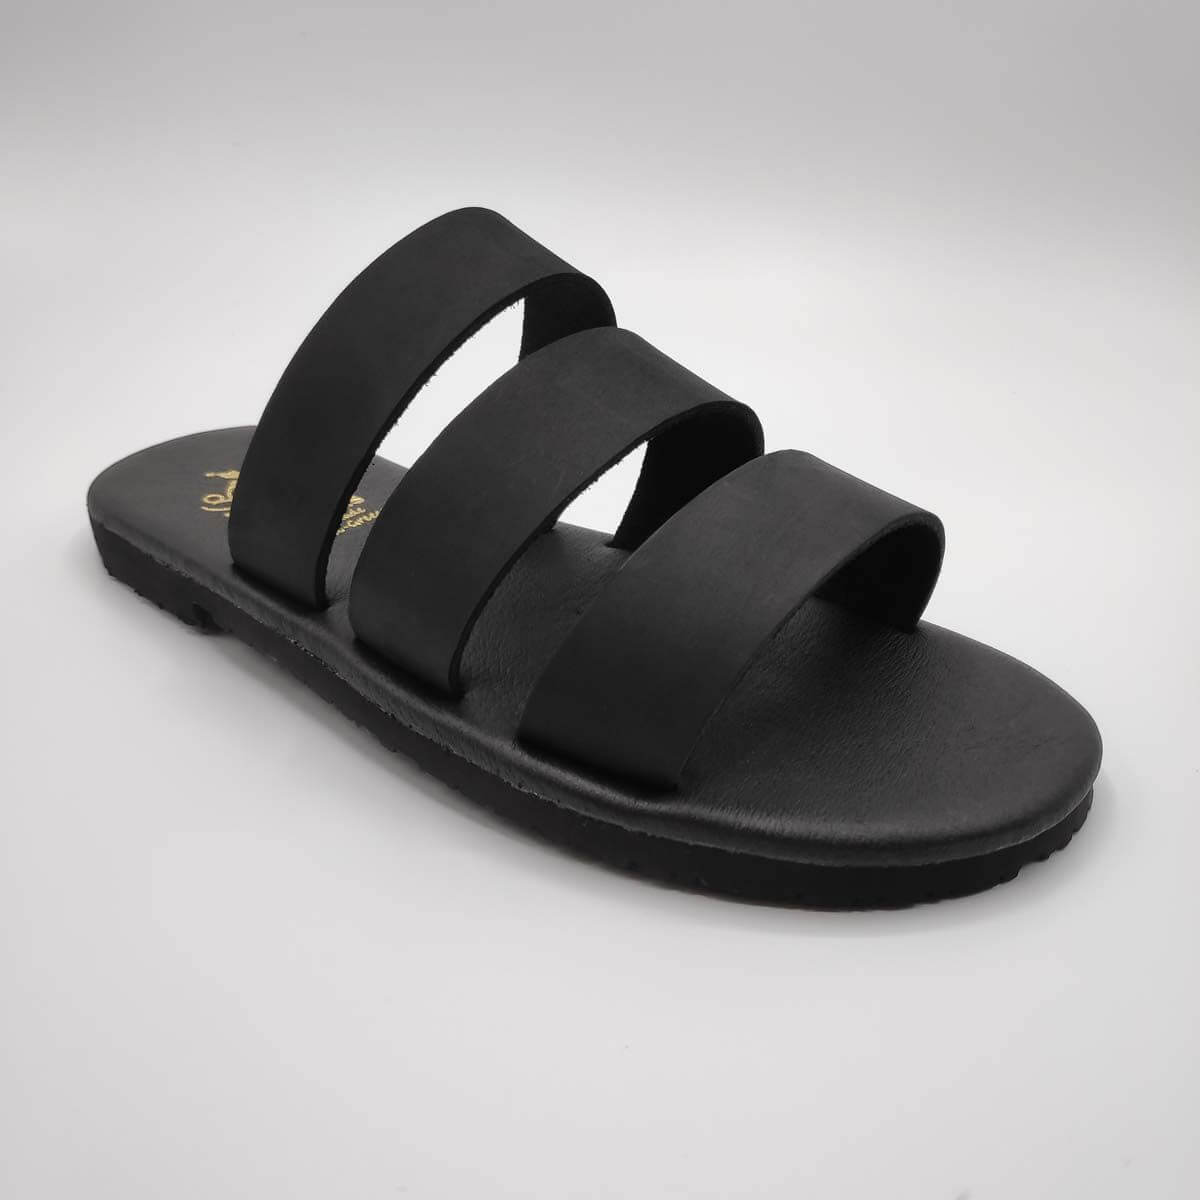 Three Straps Mens Leather Sandals Black Comfort Sandals side view single